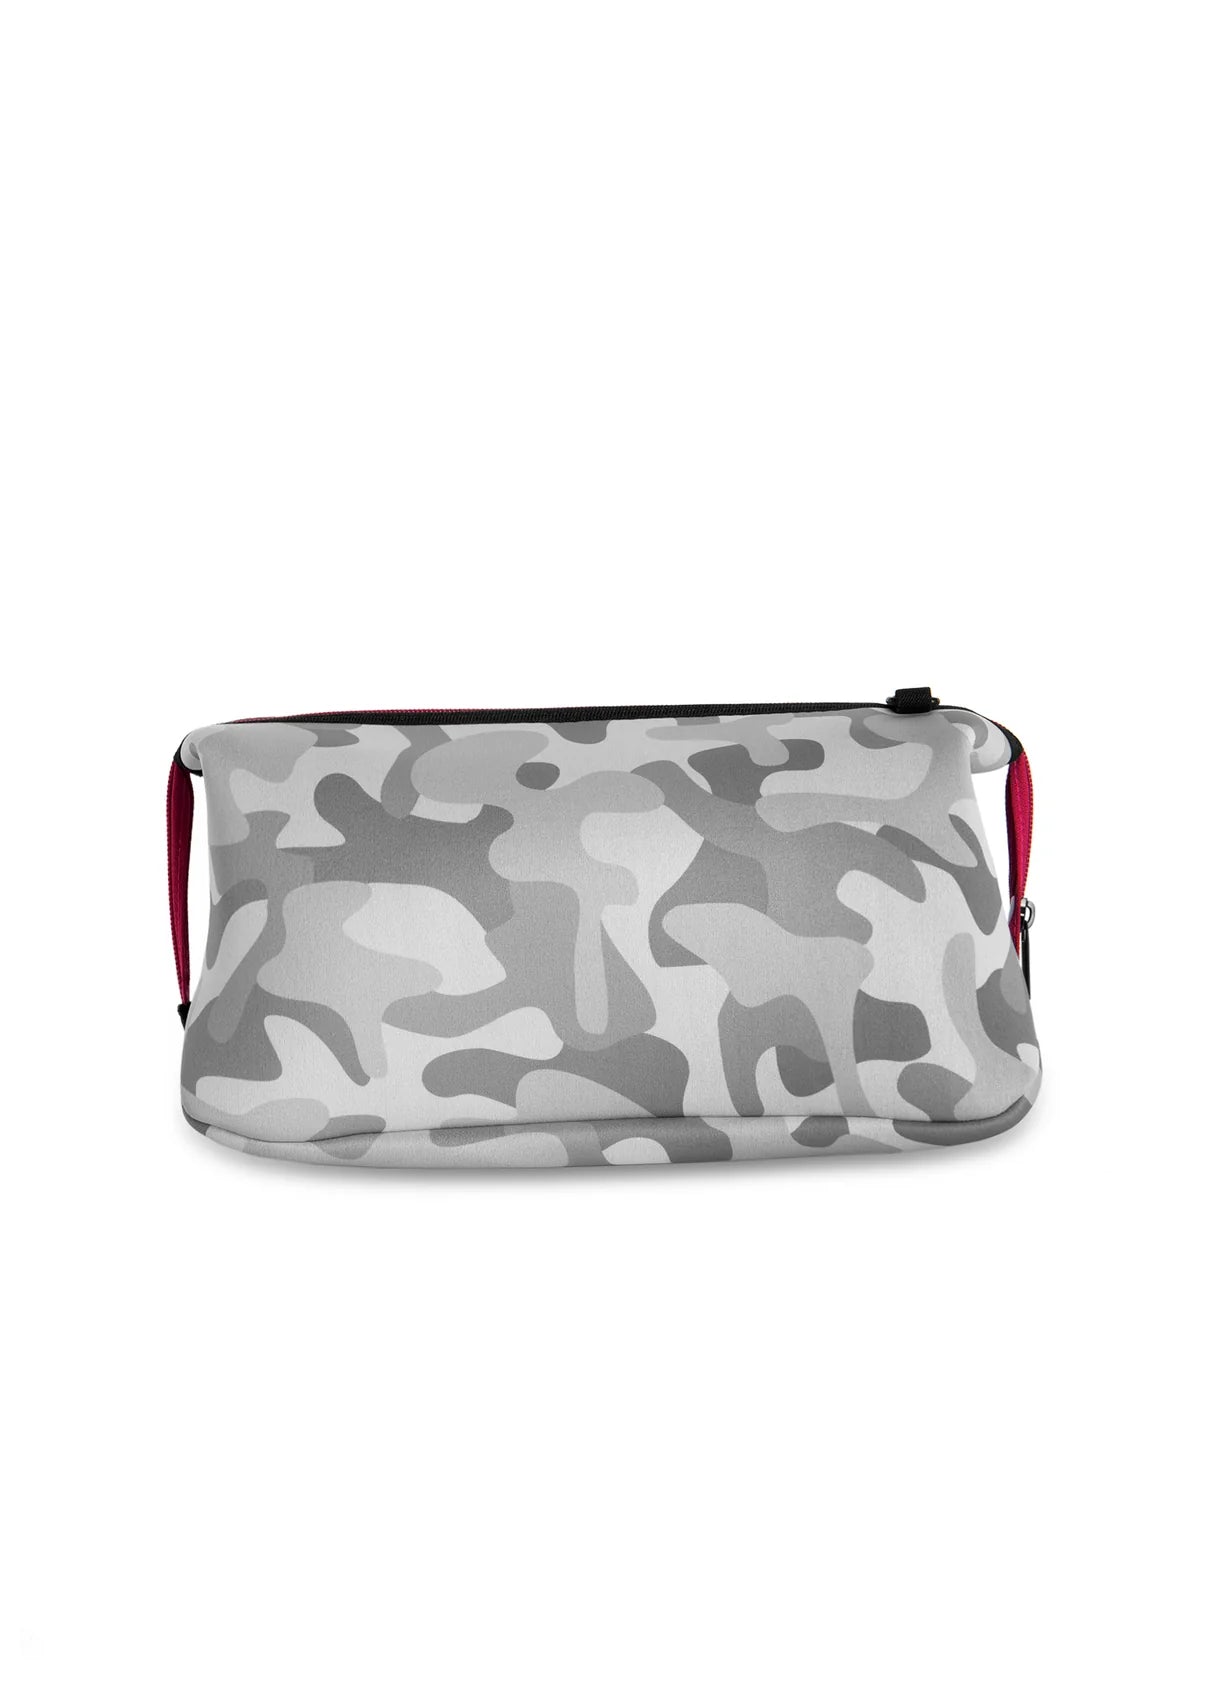 Kyle toiletry bag - rise